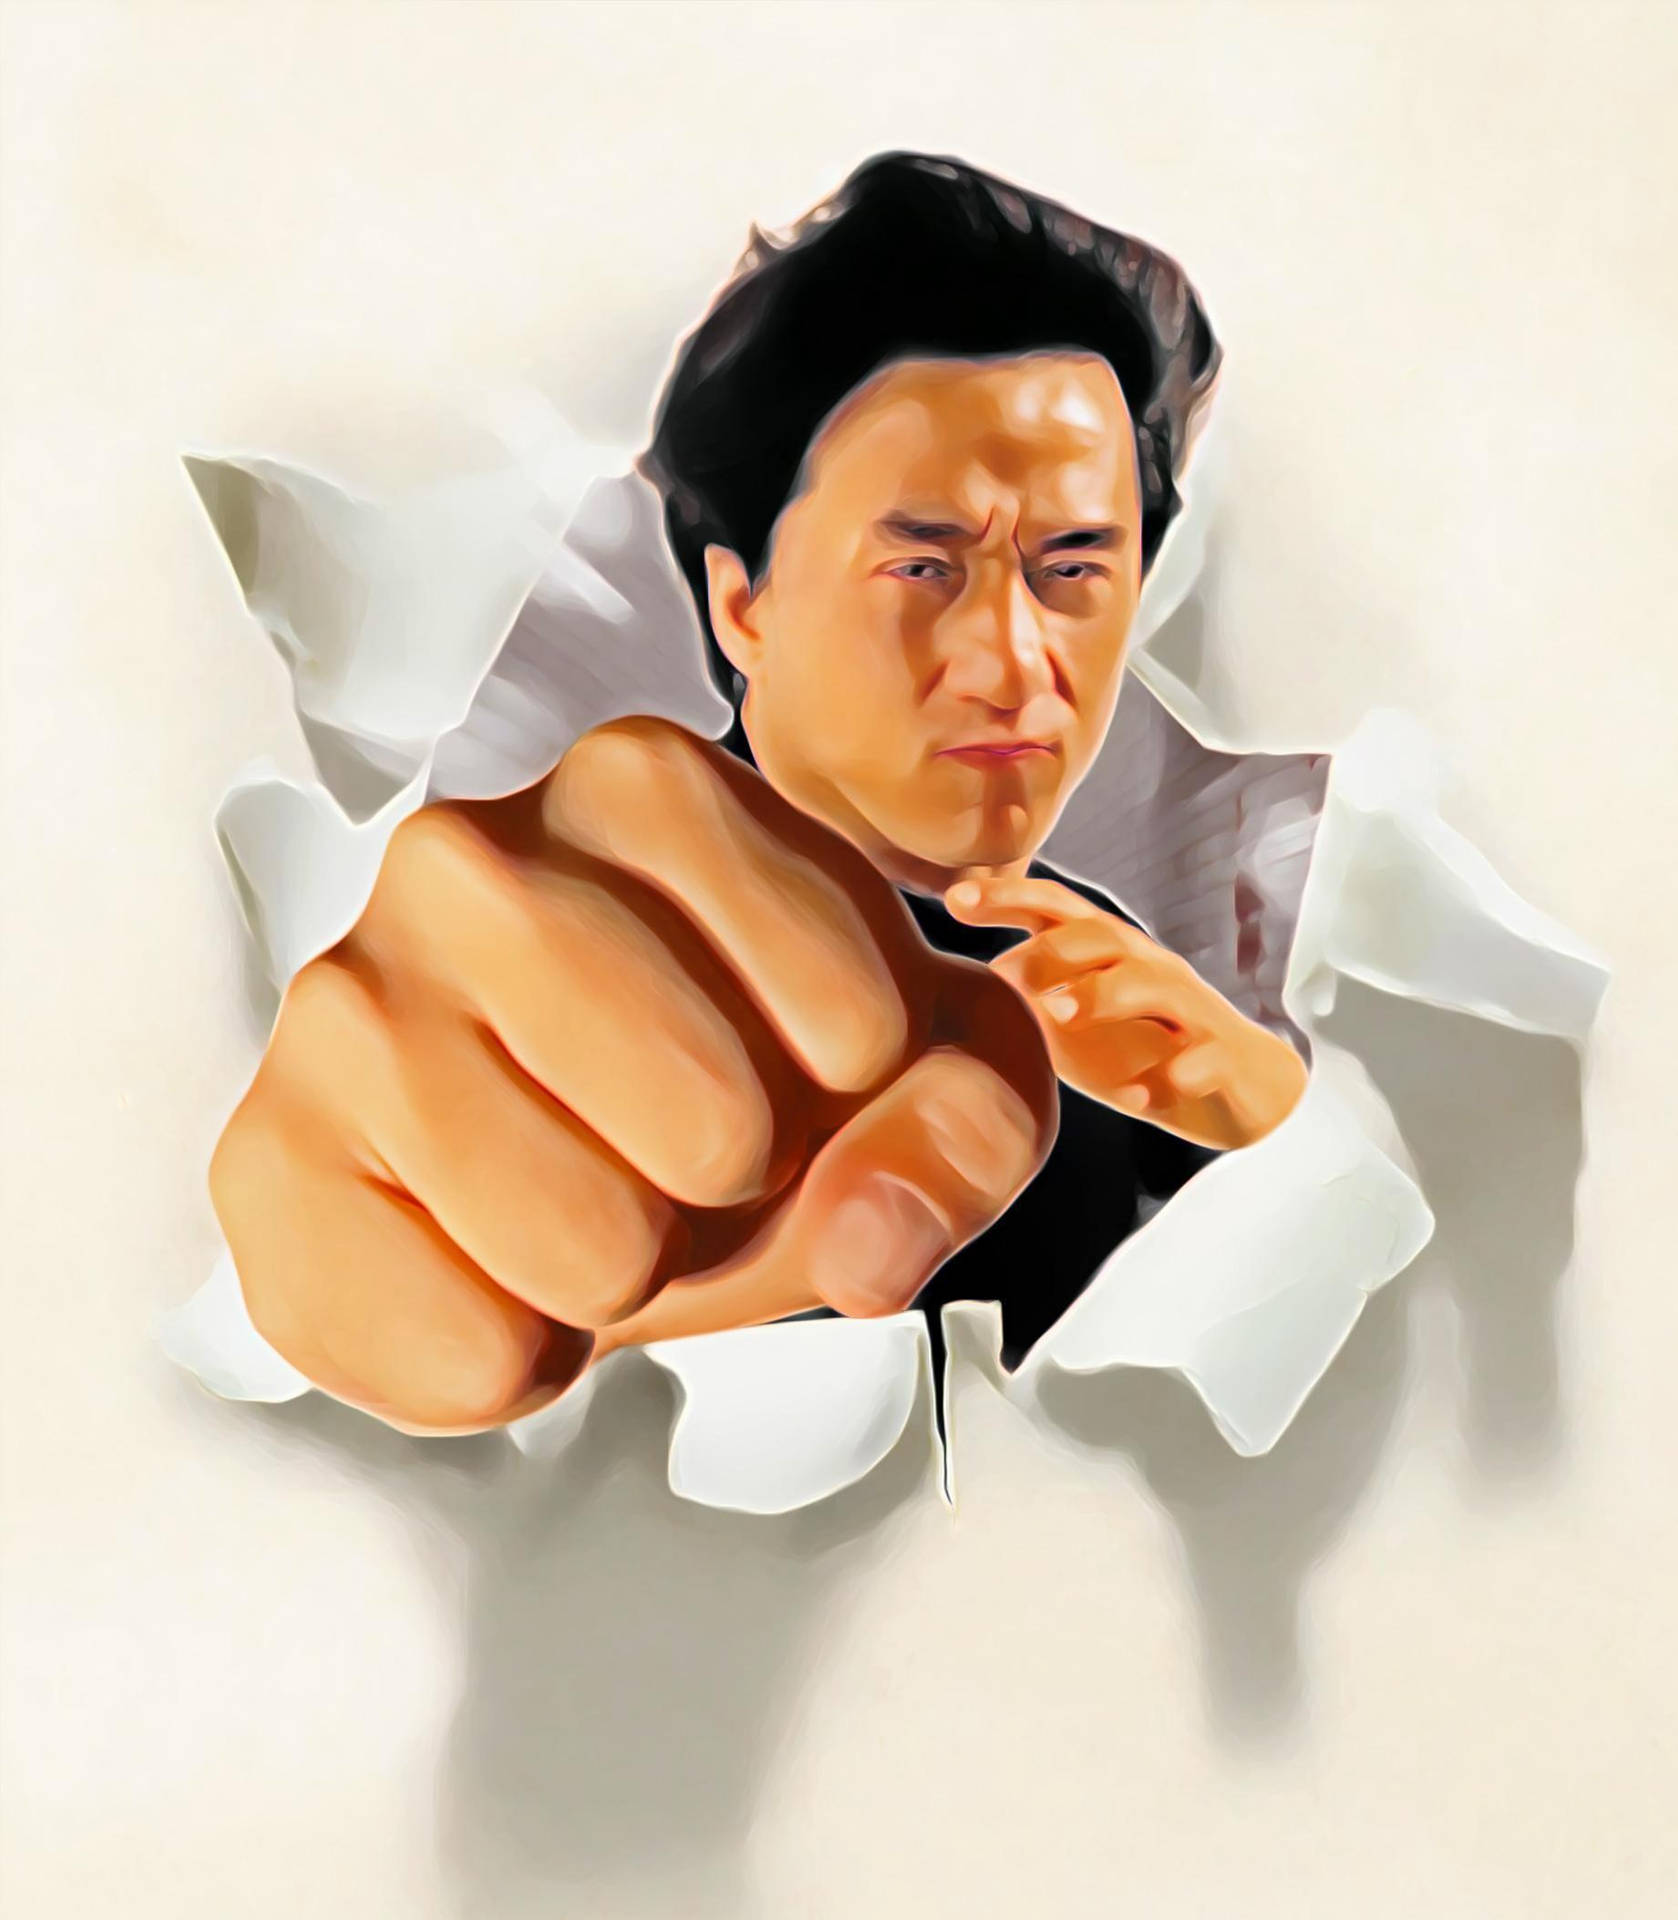 Jackie Chan executing a powerful punch in an art illustration Wallpaper